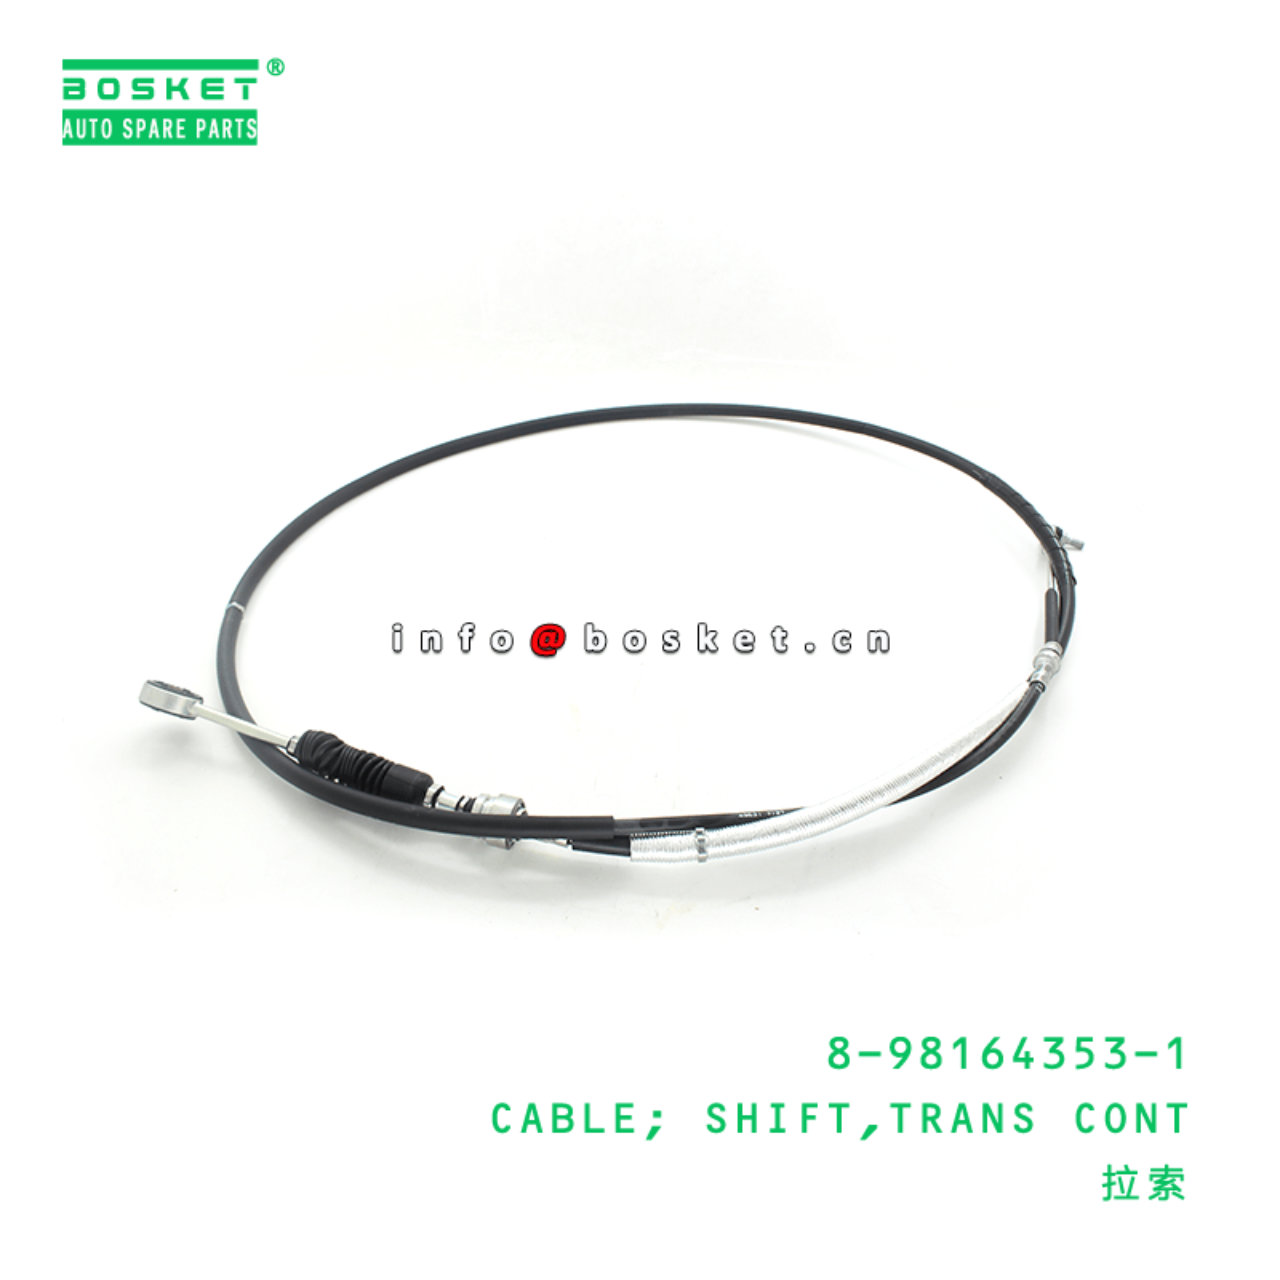 8-98164353-1 8981643531 Transmission Control Shift Cable Suitable for ISUZU NMR85